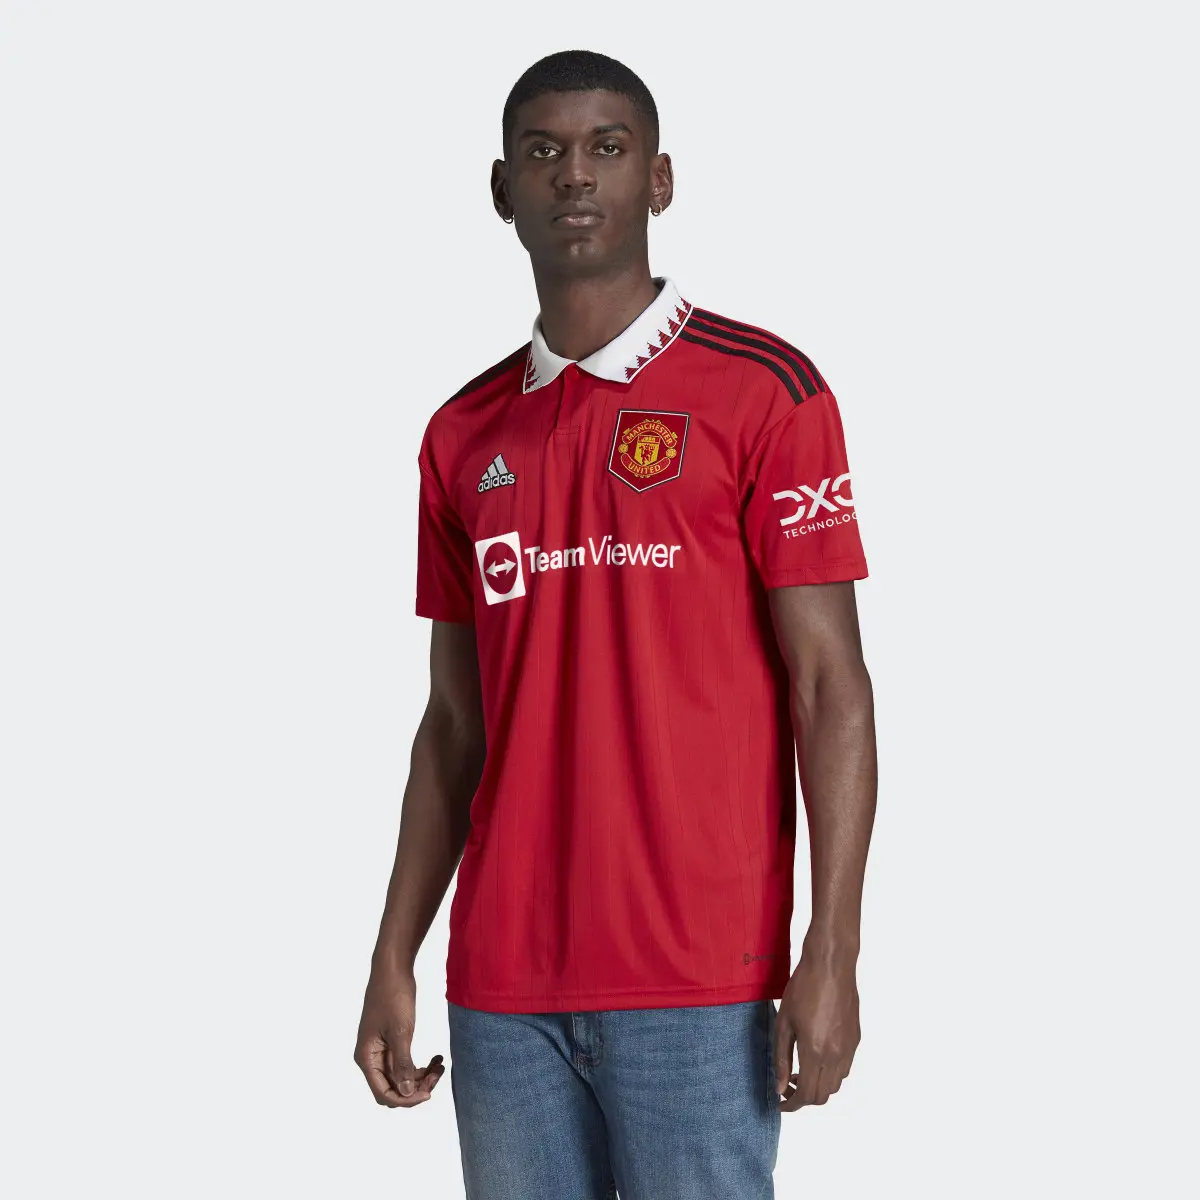 Adidas Maillot Domicile Manchester United 22/23. 2